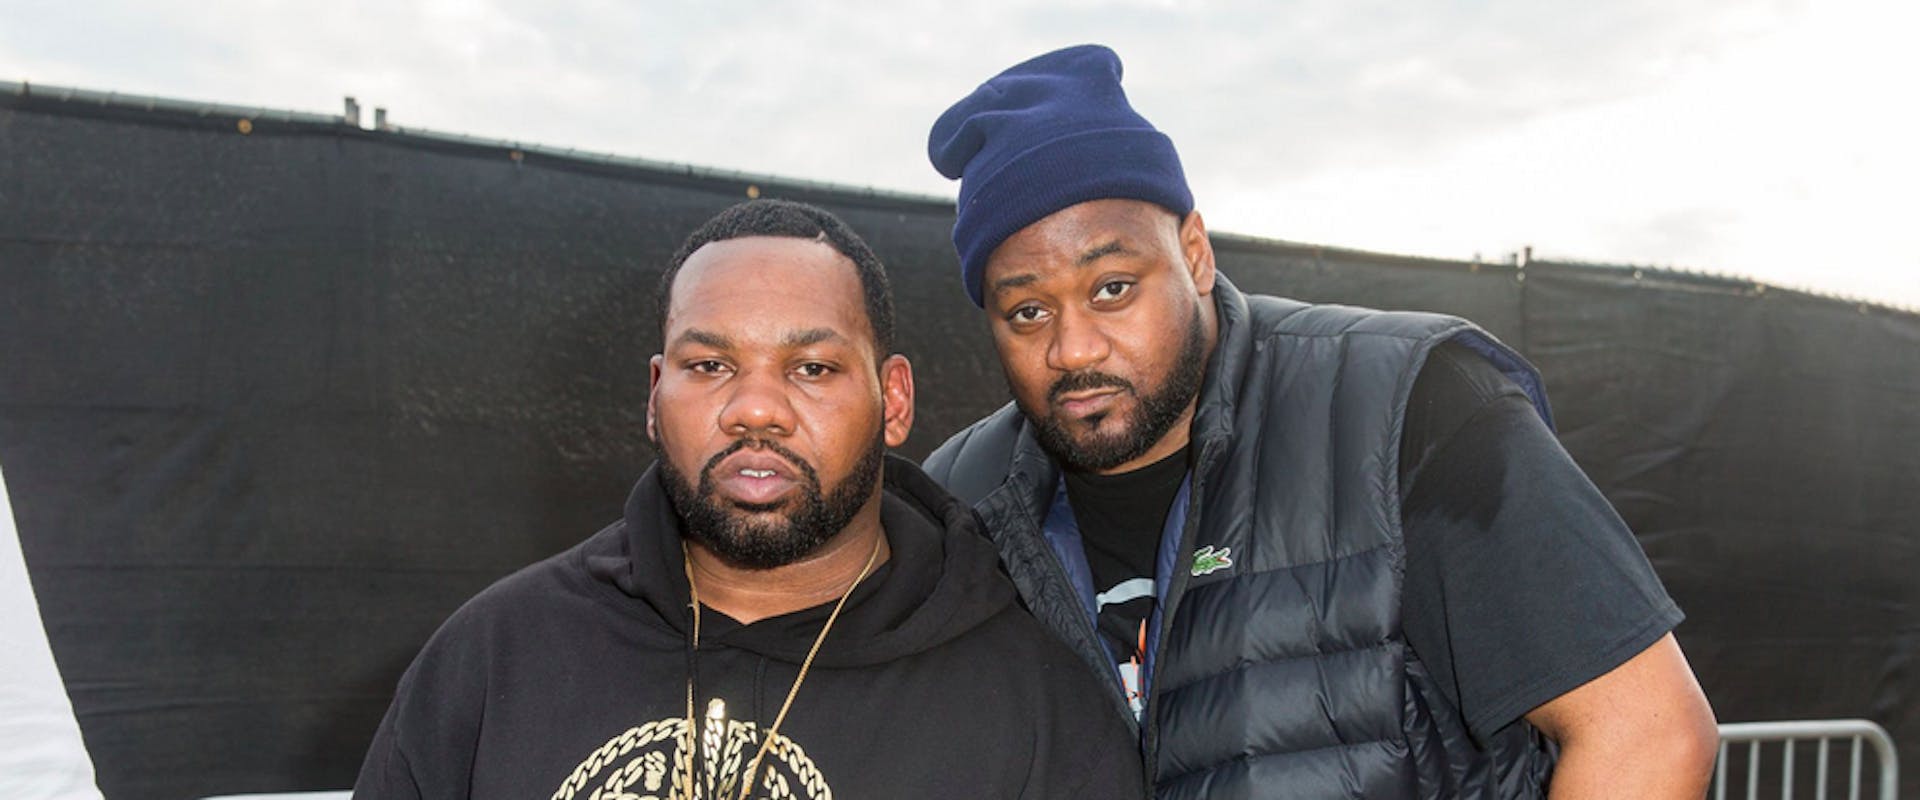 AUSTIN, TX - MARCH 19: Raekwon and Ghostface Killah attend The FADER FORT Presented by Converse during SXSW on March 19, 2015 in Austin, Texas